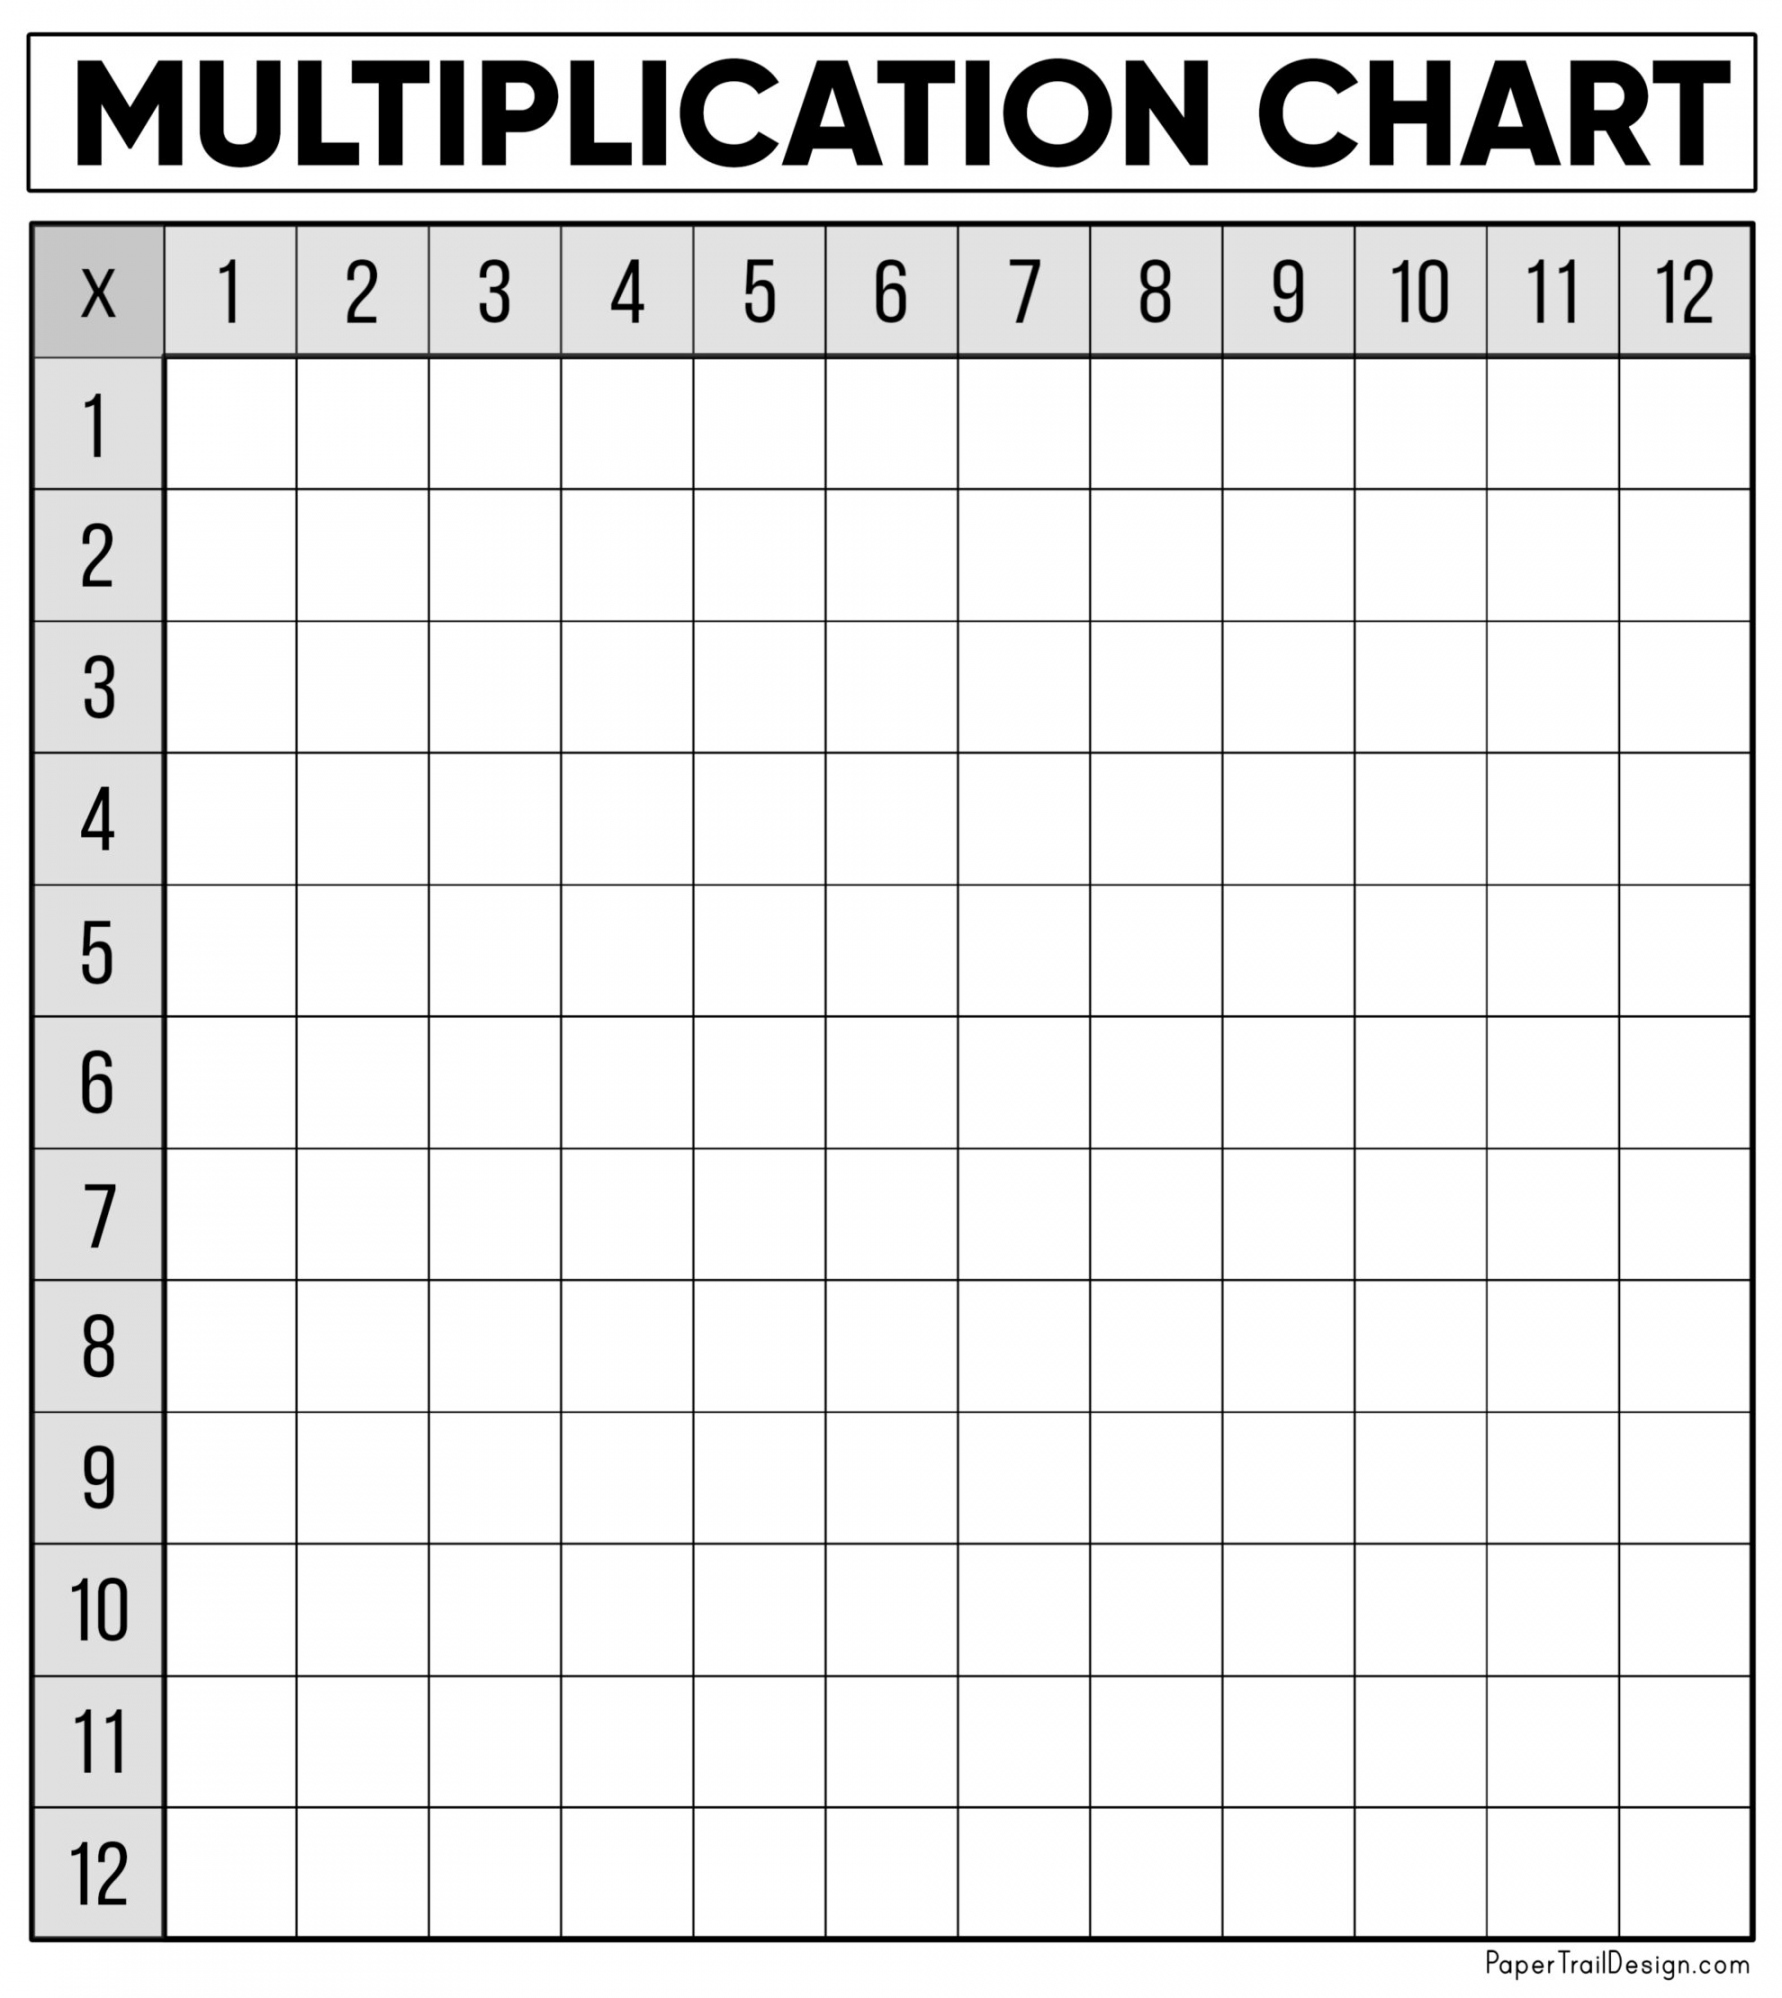 Free Multiplication Chart Printable - Paper Trail Design - FREE Printables - Blank Mulitplication Chart